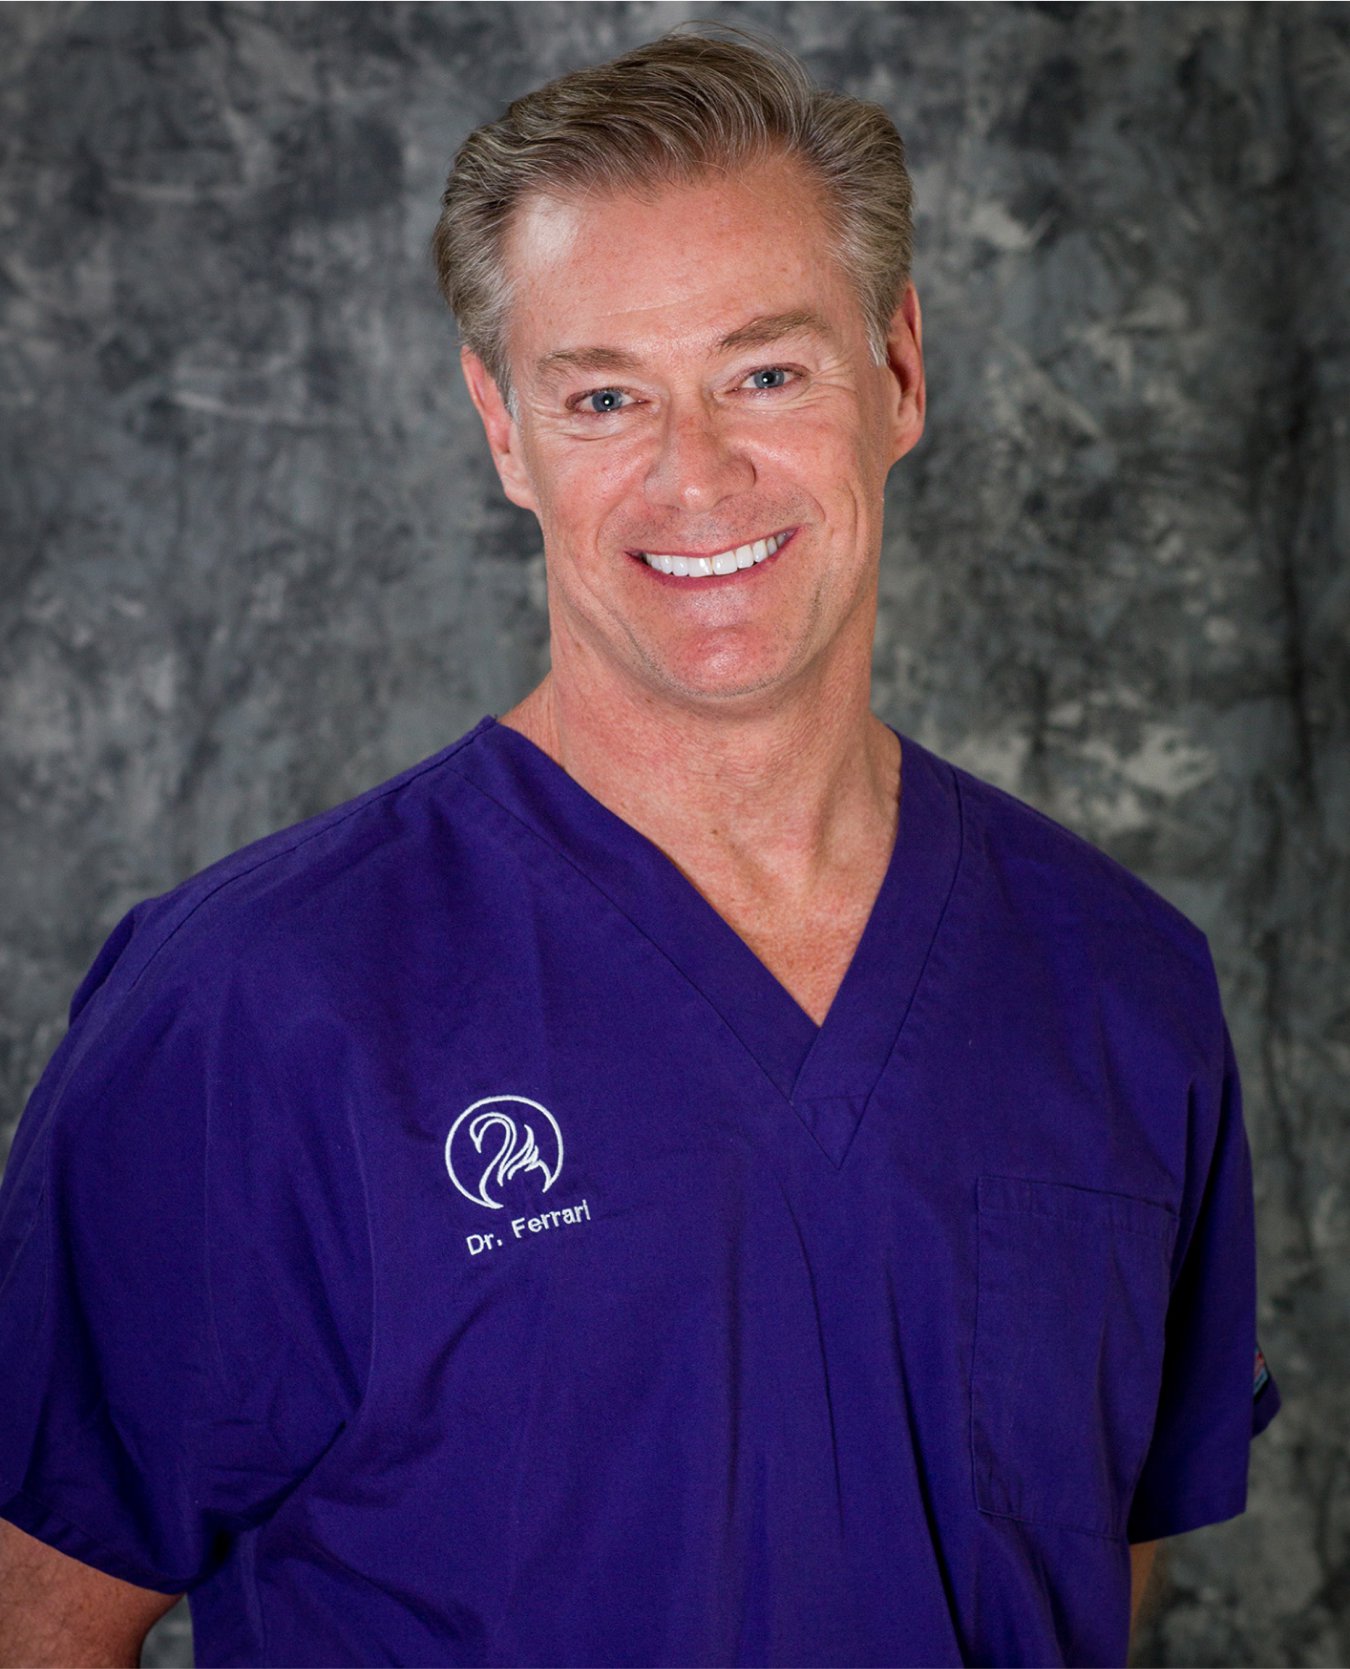 Charlotte Breast Implant Removal Surgeon